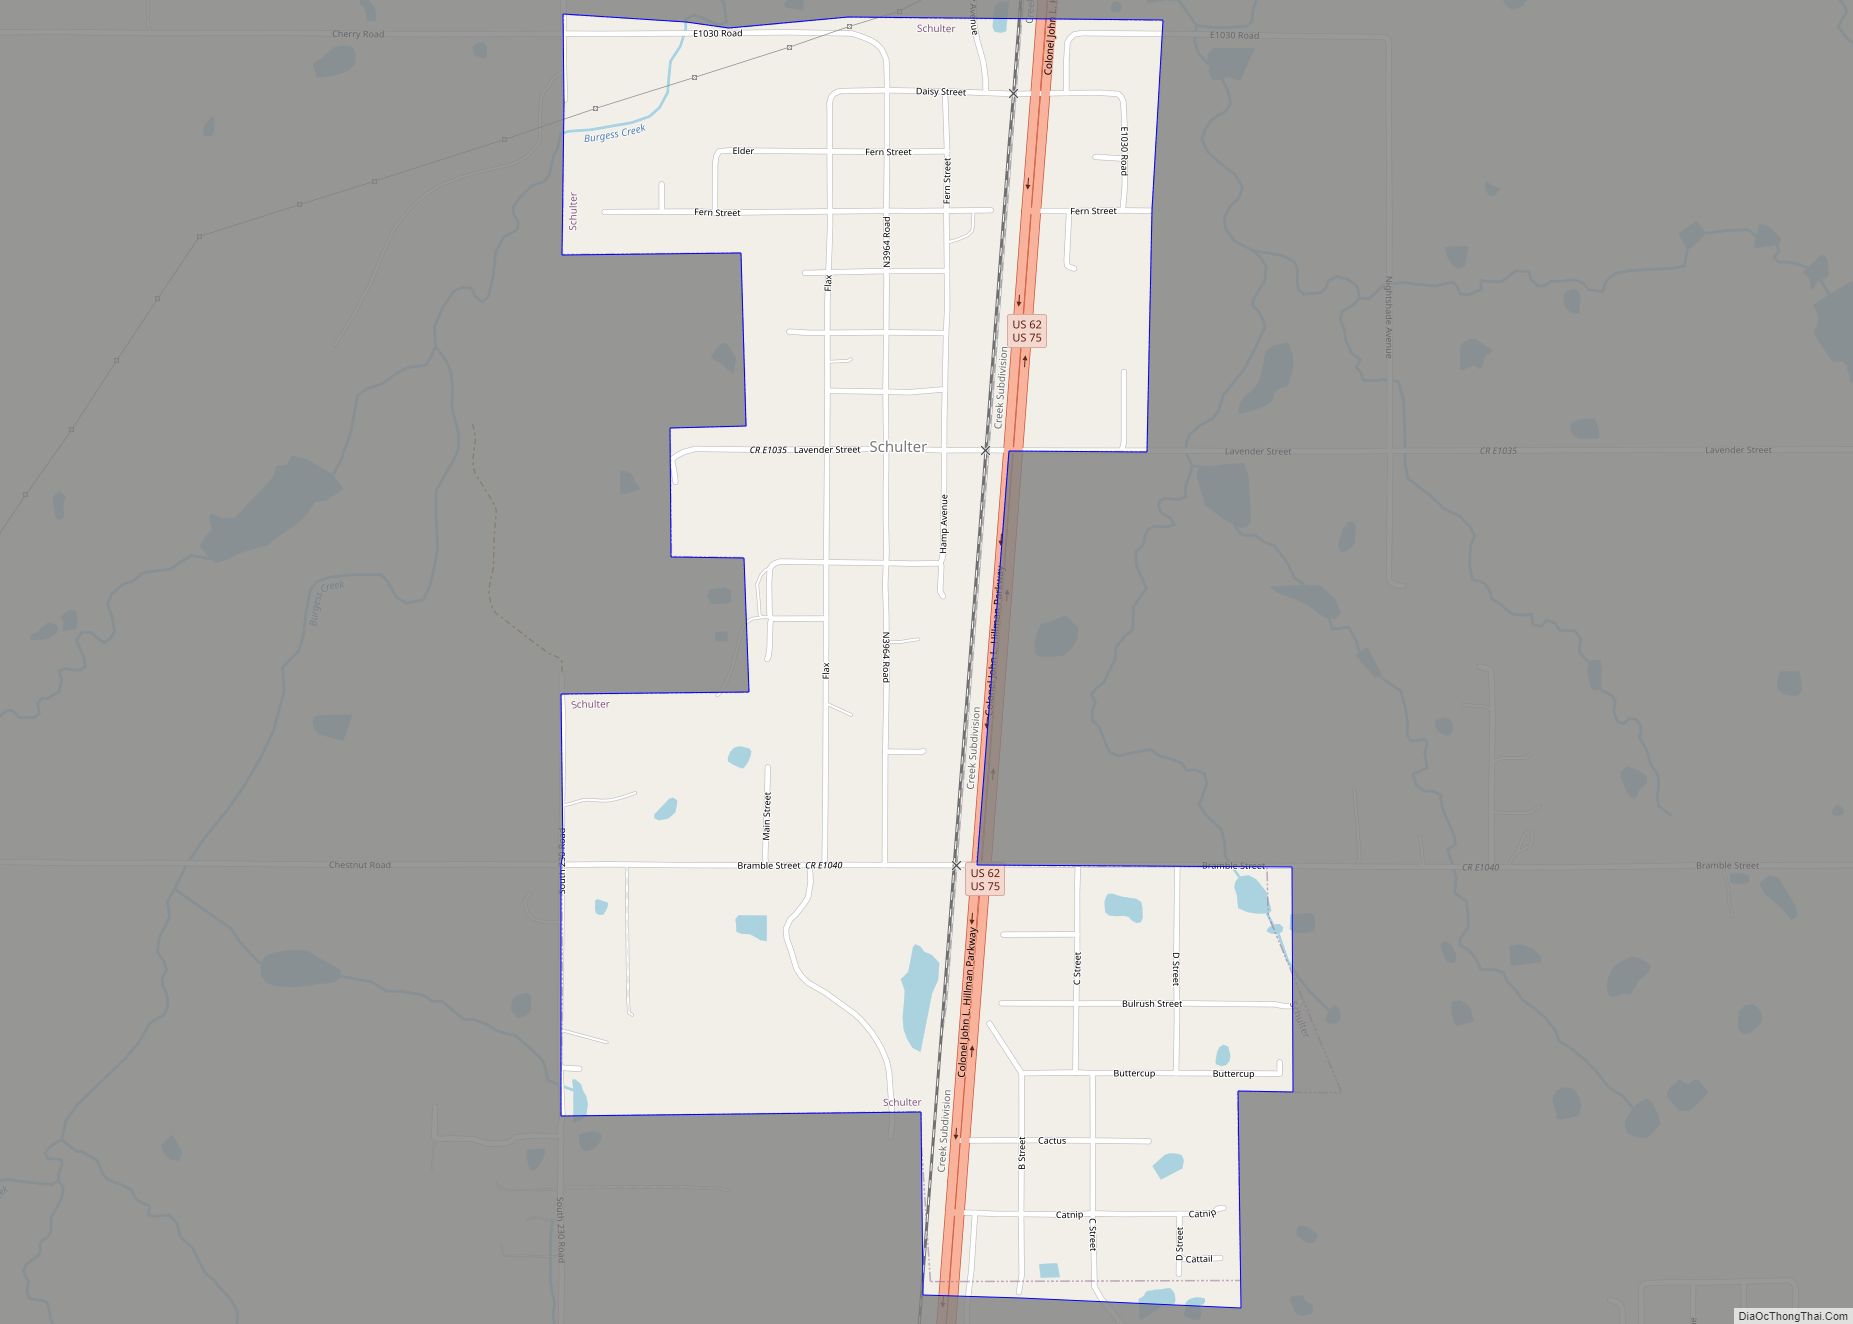 Map of Schulter town